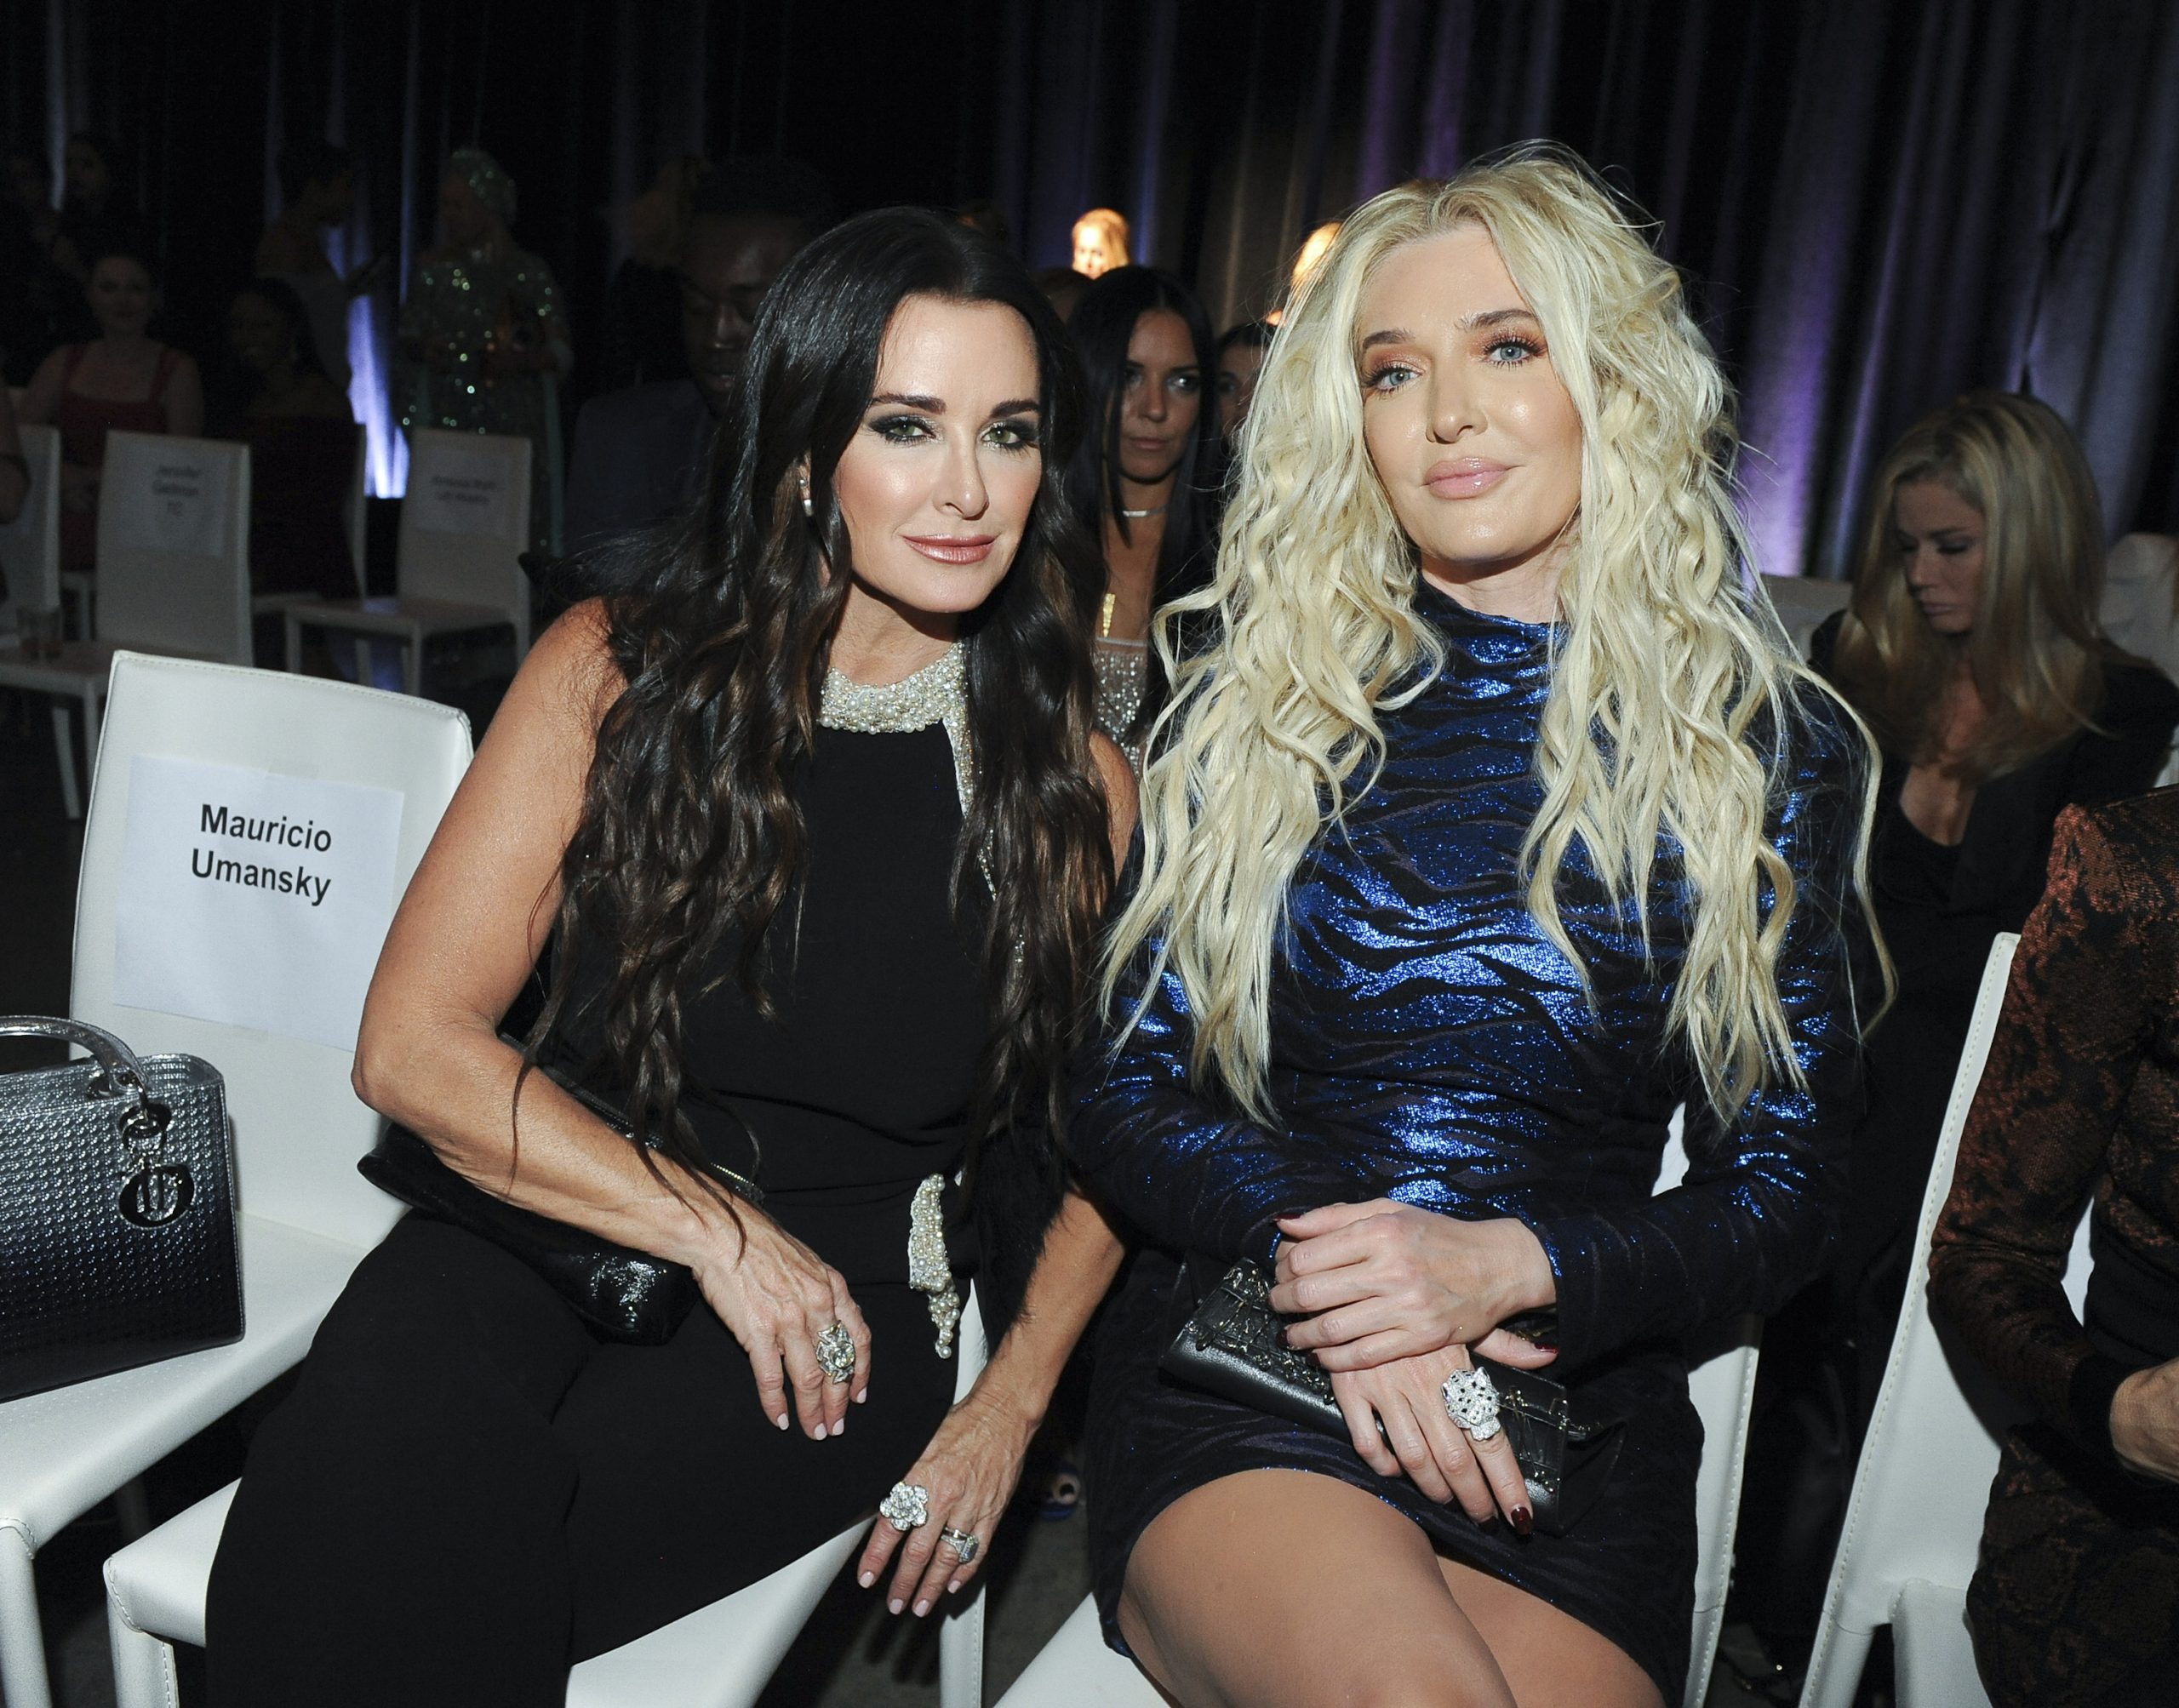 ‘RHOBH’: Erika Jayne Is ‘Disappointed’ That Kyle Richards ‘Turned on Her’